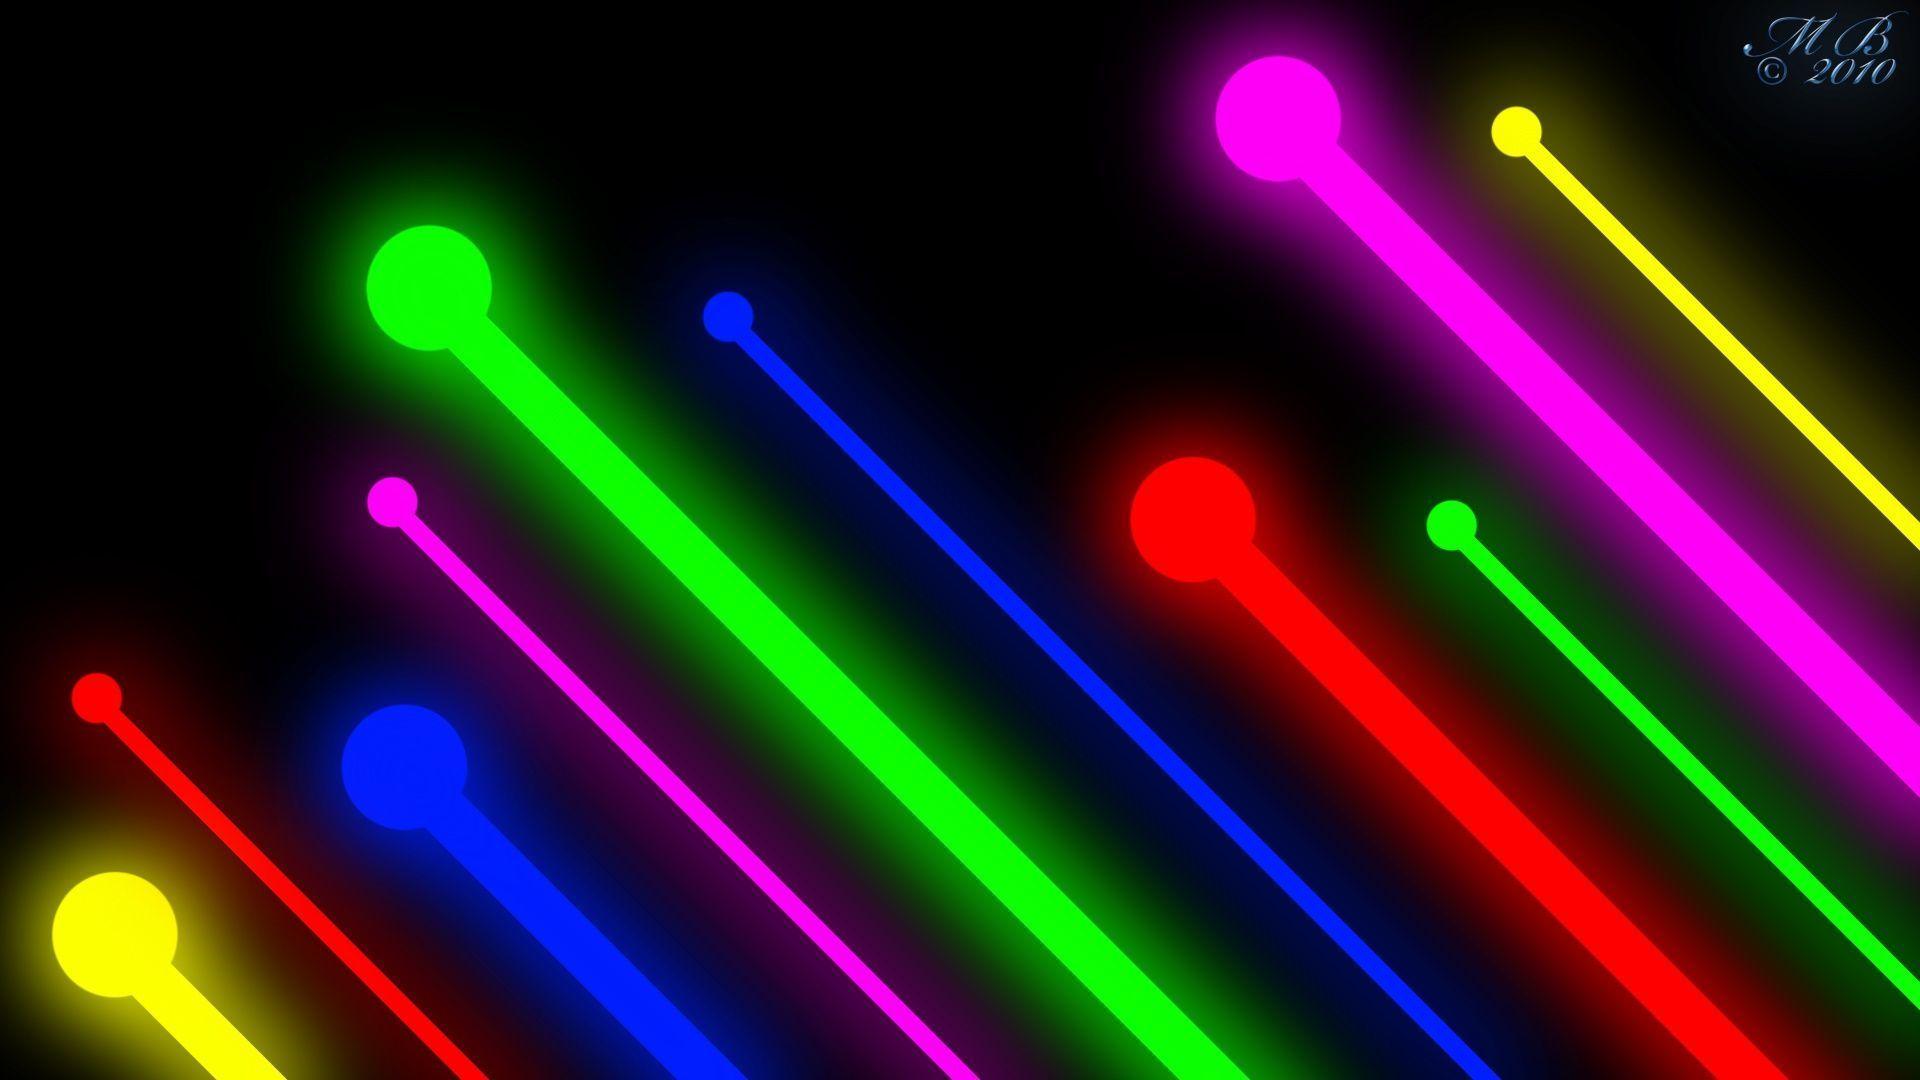 Neon Background 34 358658 High Definition Wallpaper. wallalay